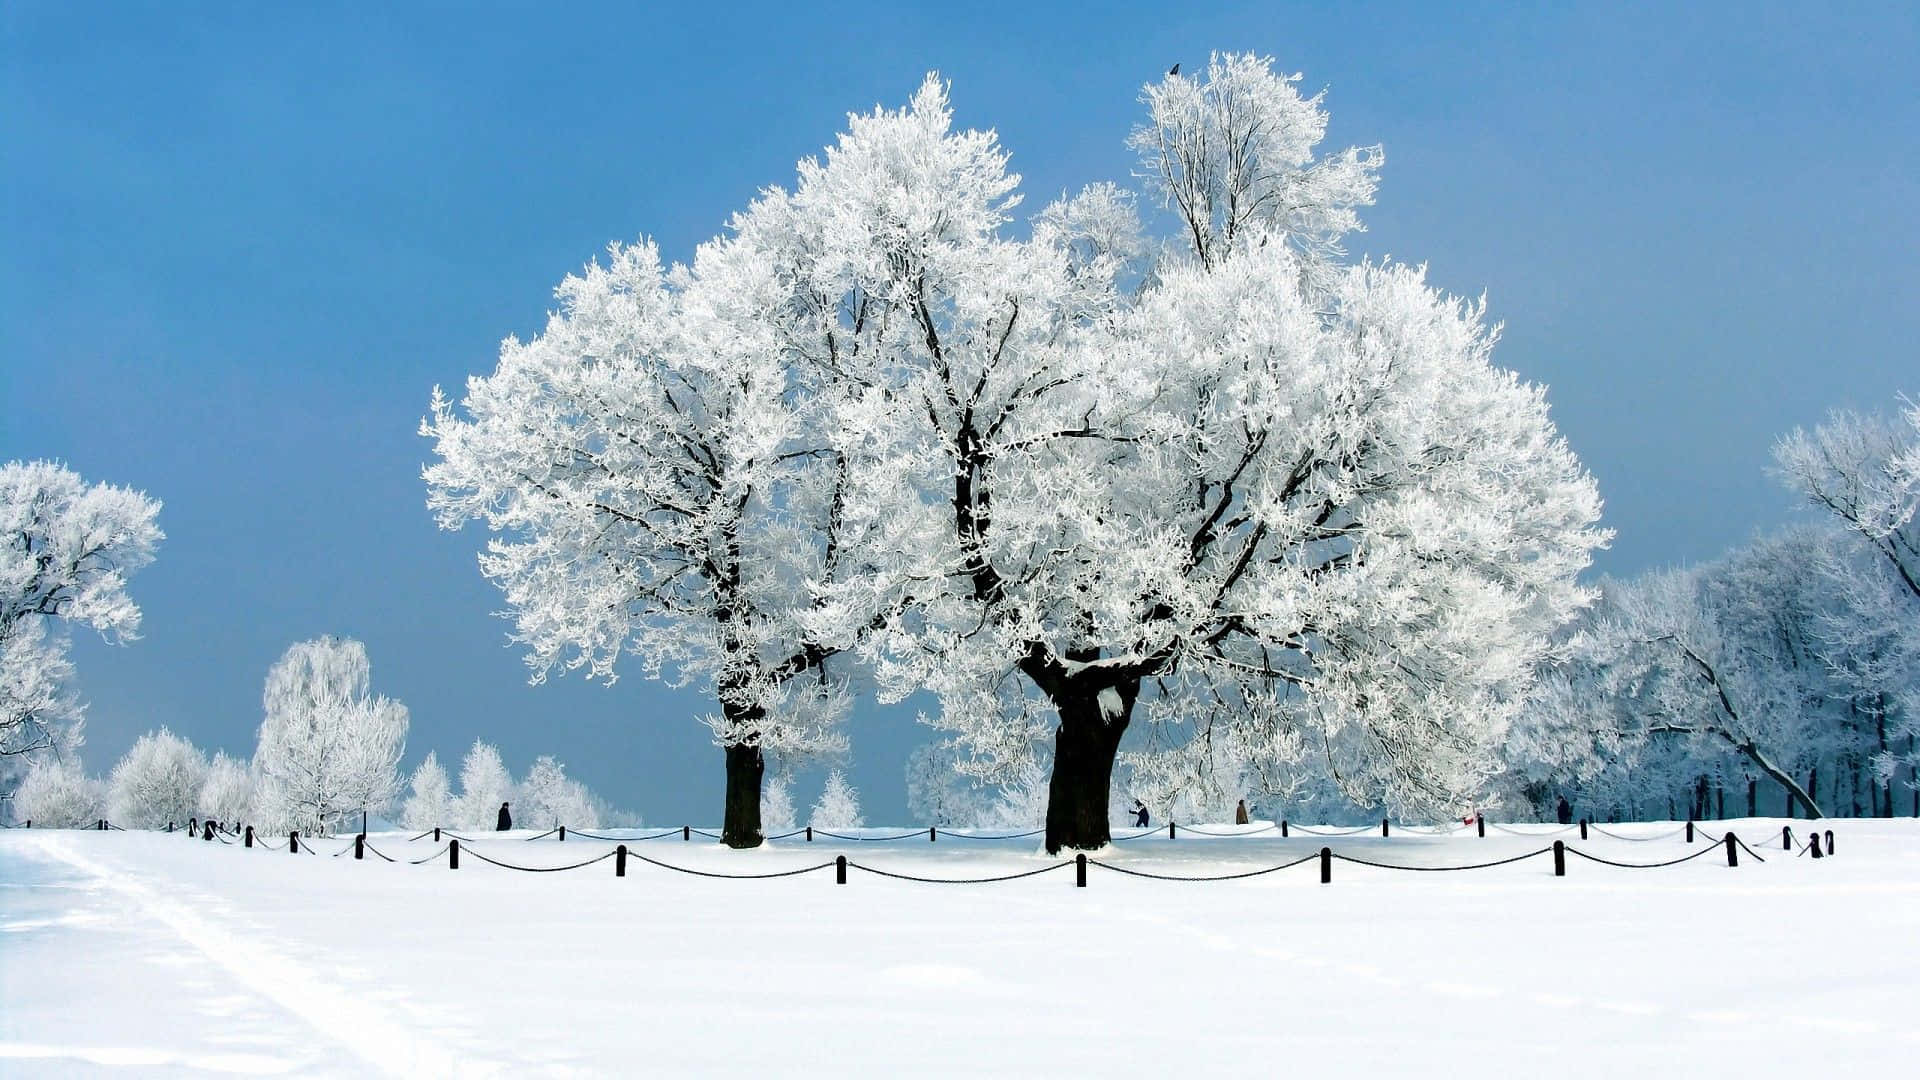 Winter Trees With Fence For Snow Background